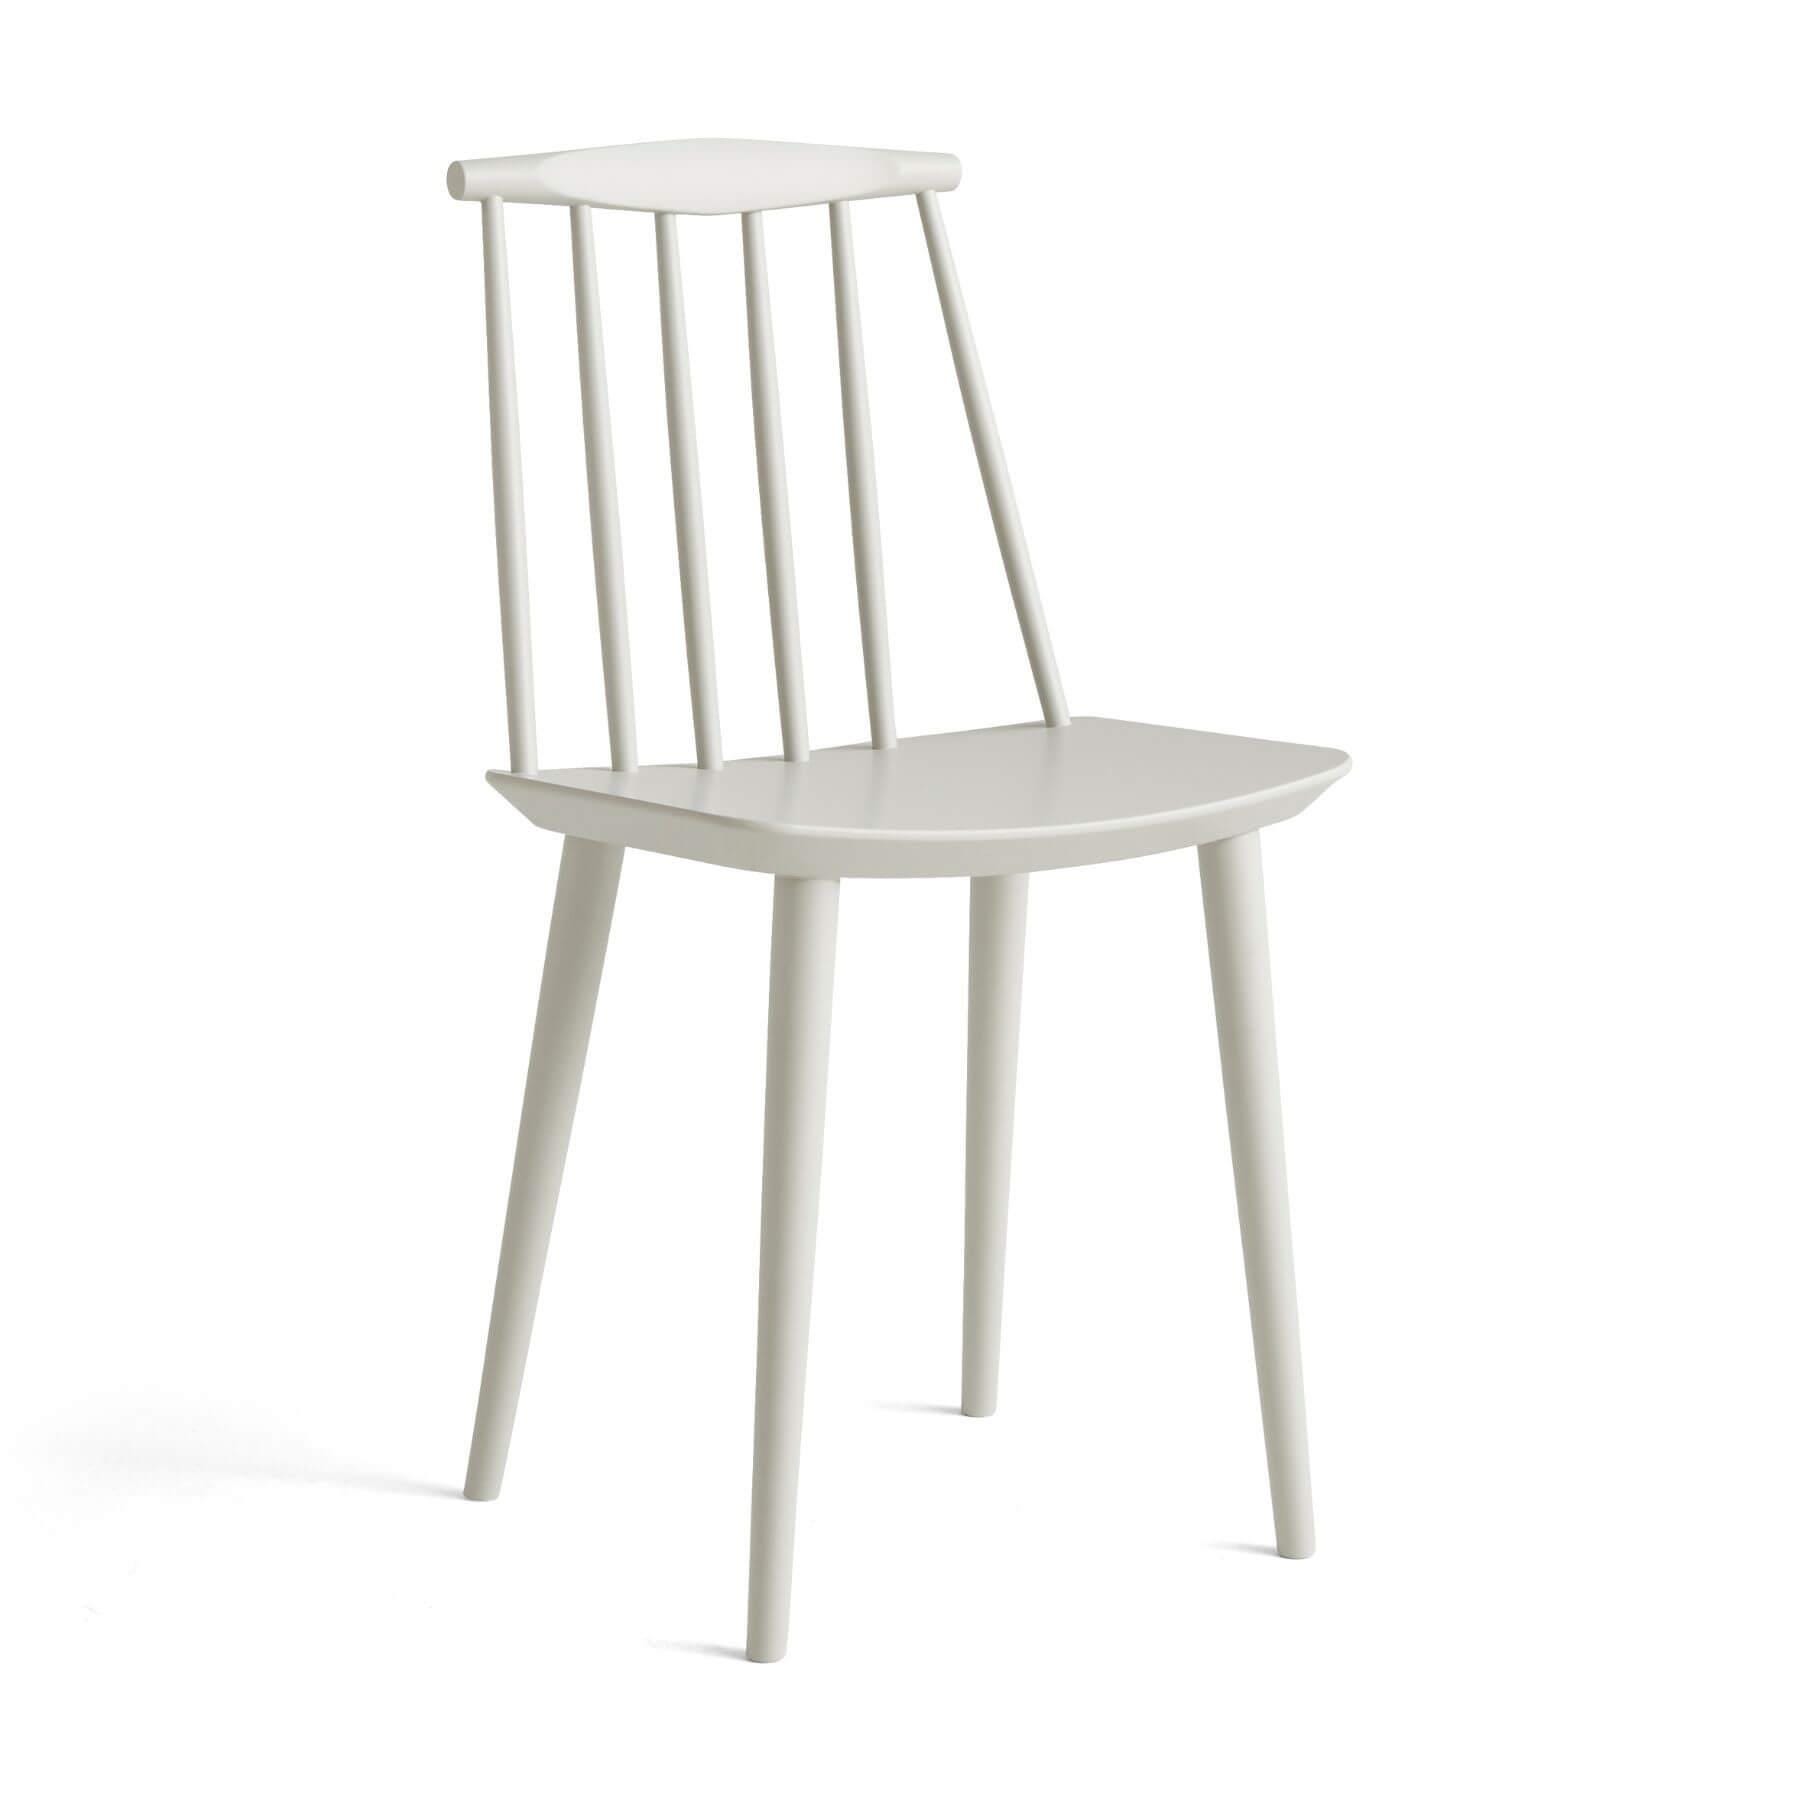 Hay Jseries 77 Dining Chair Beech Lacquered Grey Standard Gliders Green Designer Furniture From Holloways Of Ludlow